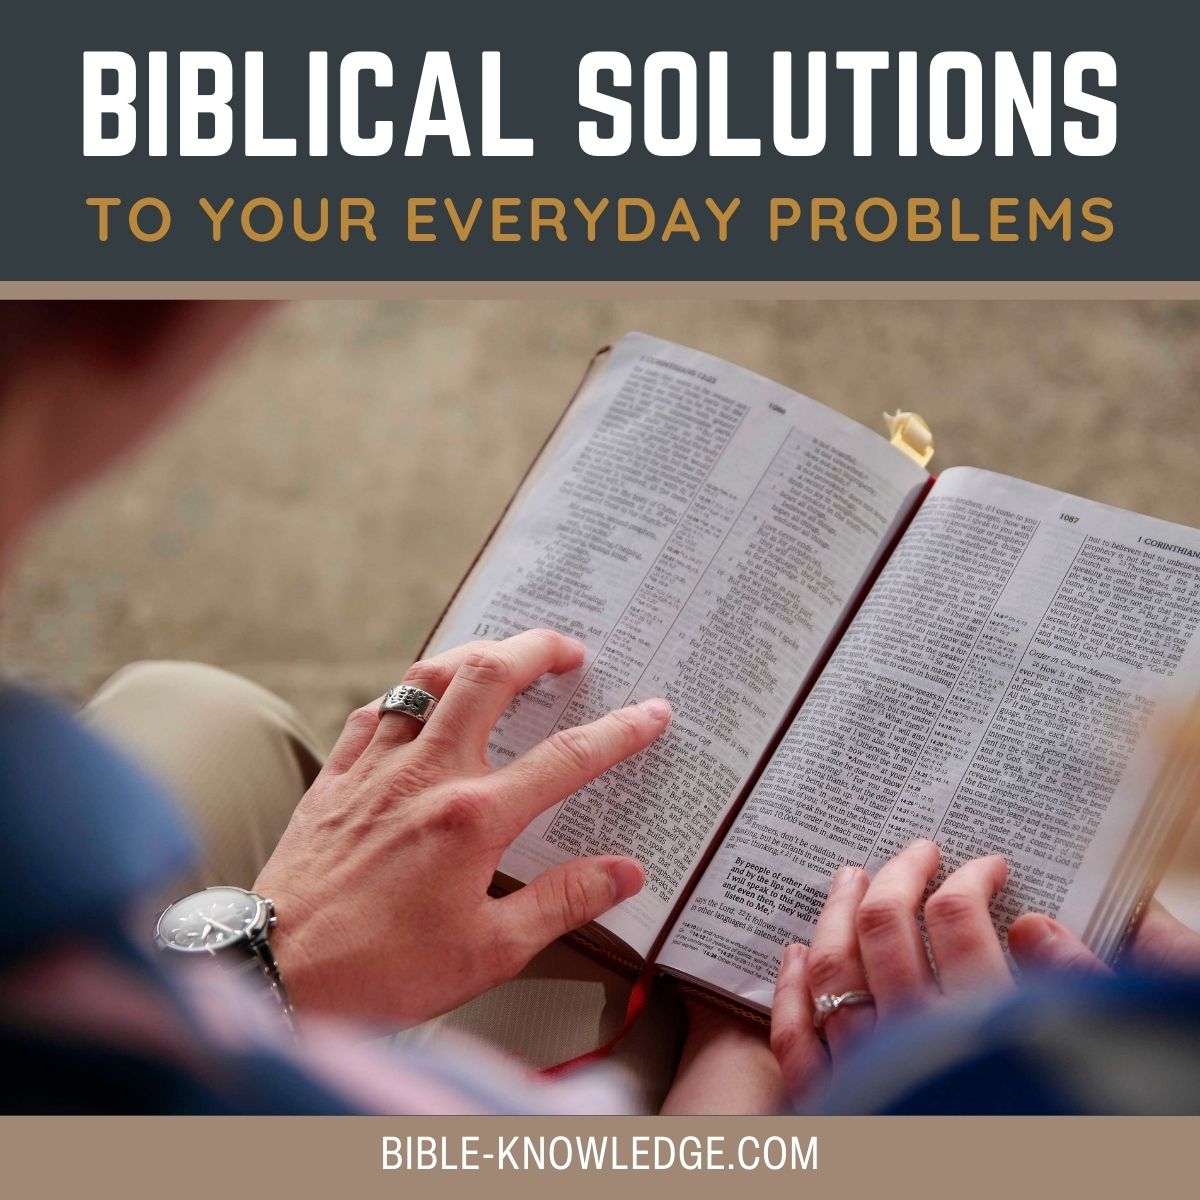 Biblical Solutions to Your Everyday Problems